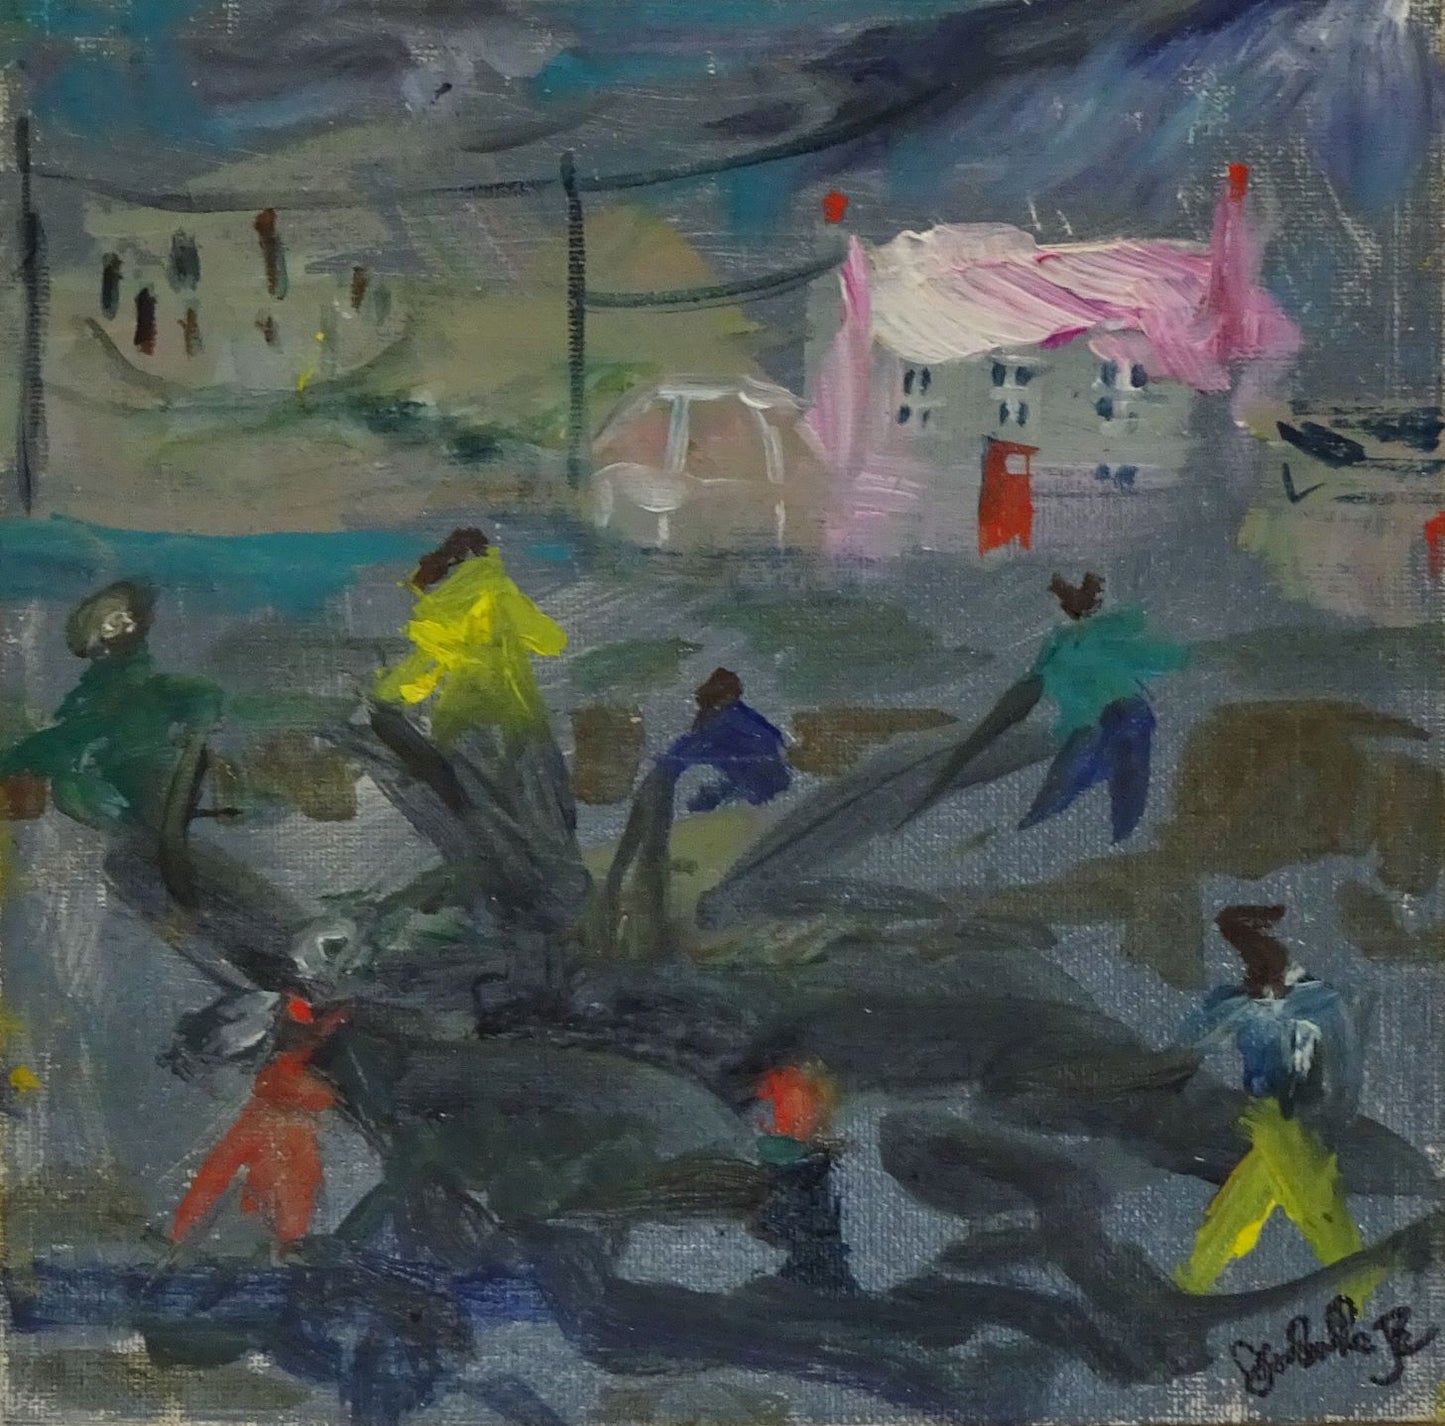 Original painting from the NEss of Brodgar by Jeanne Bouza Rose titled CLosing the NEss with Black Plastic and Highland Park Yellow Slickers at the Ness 2022